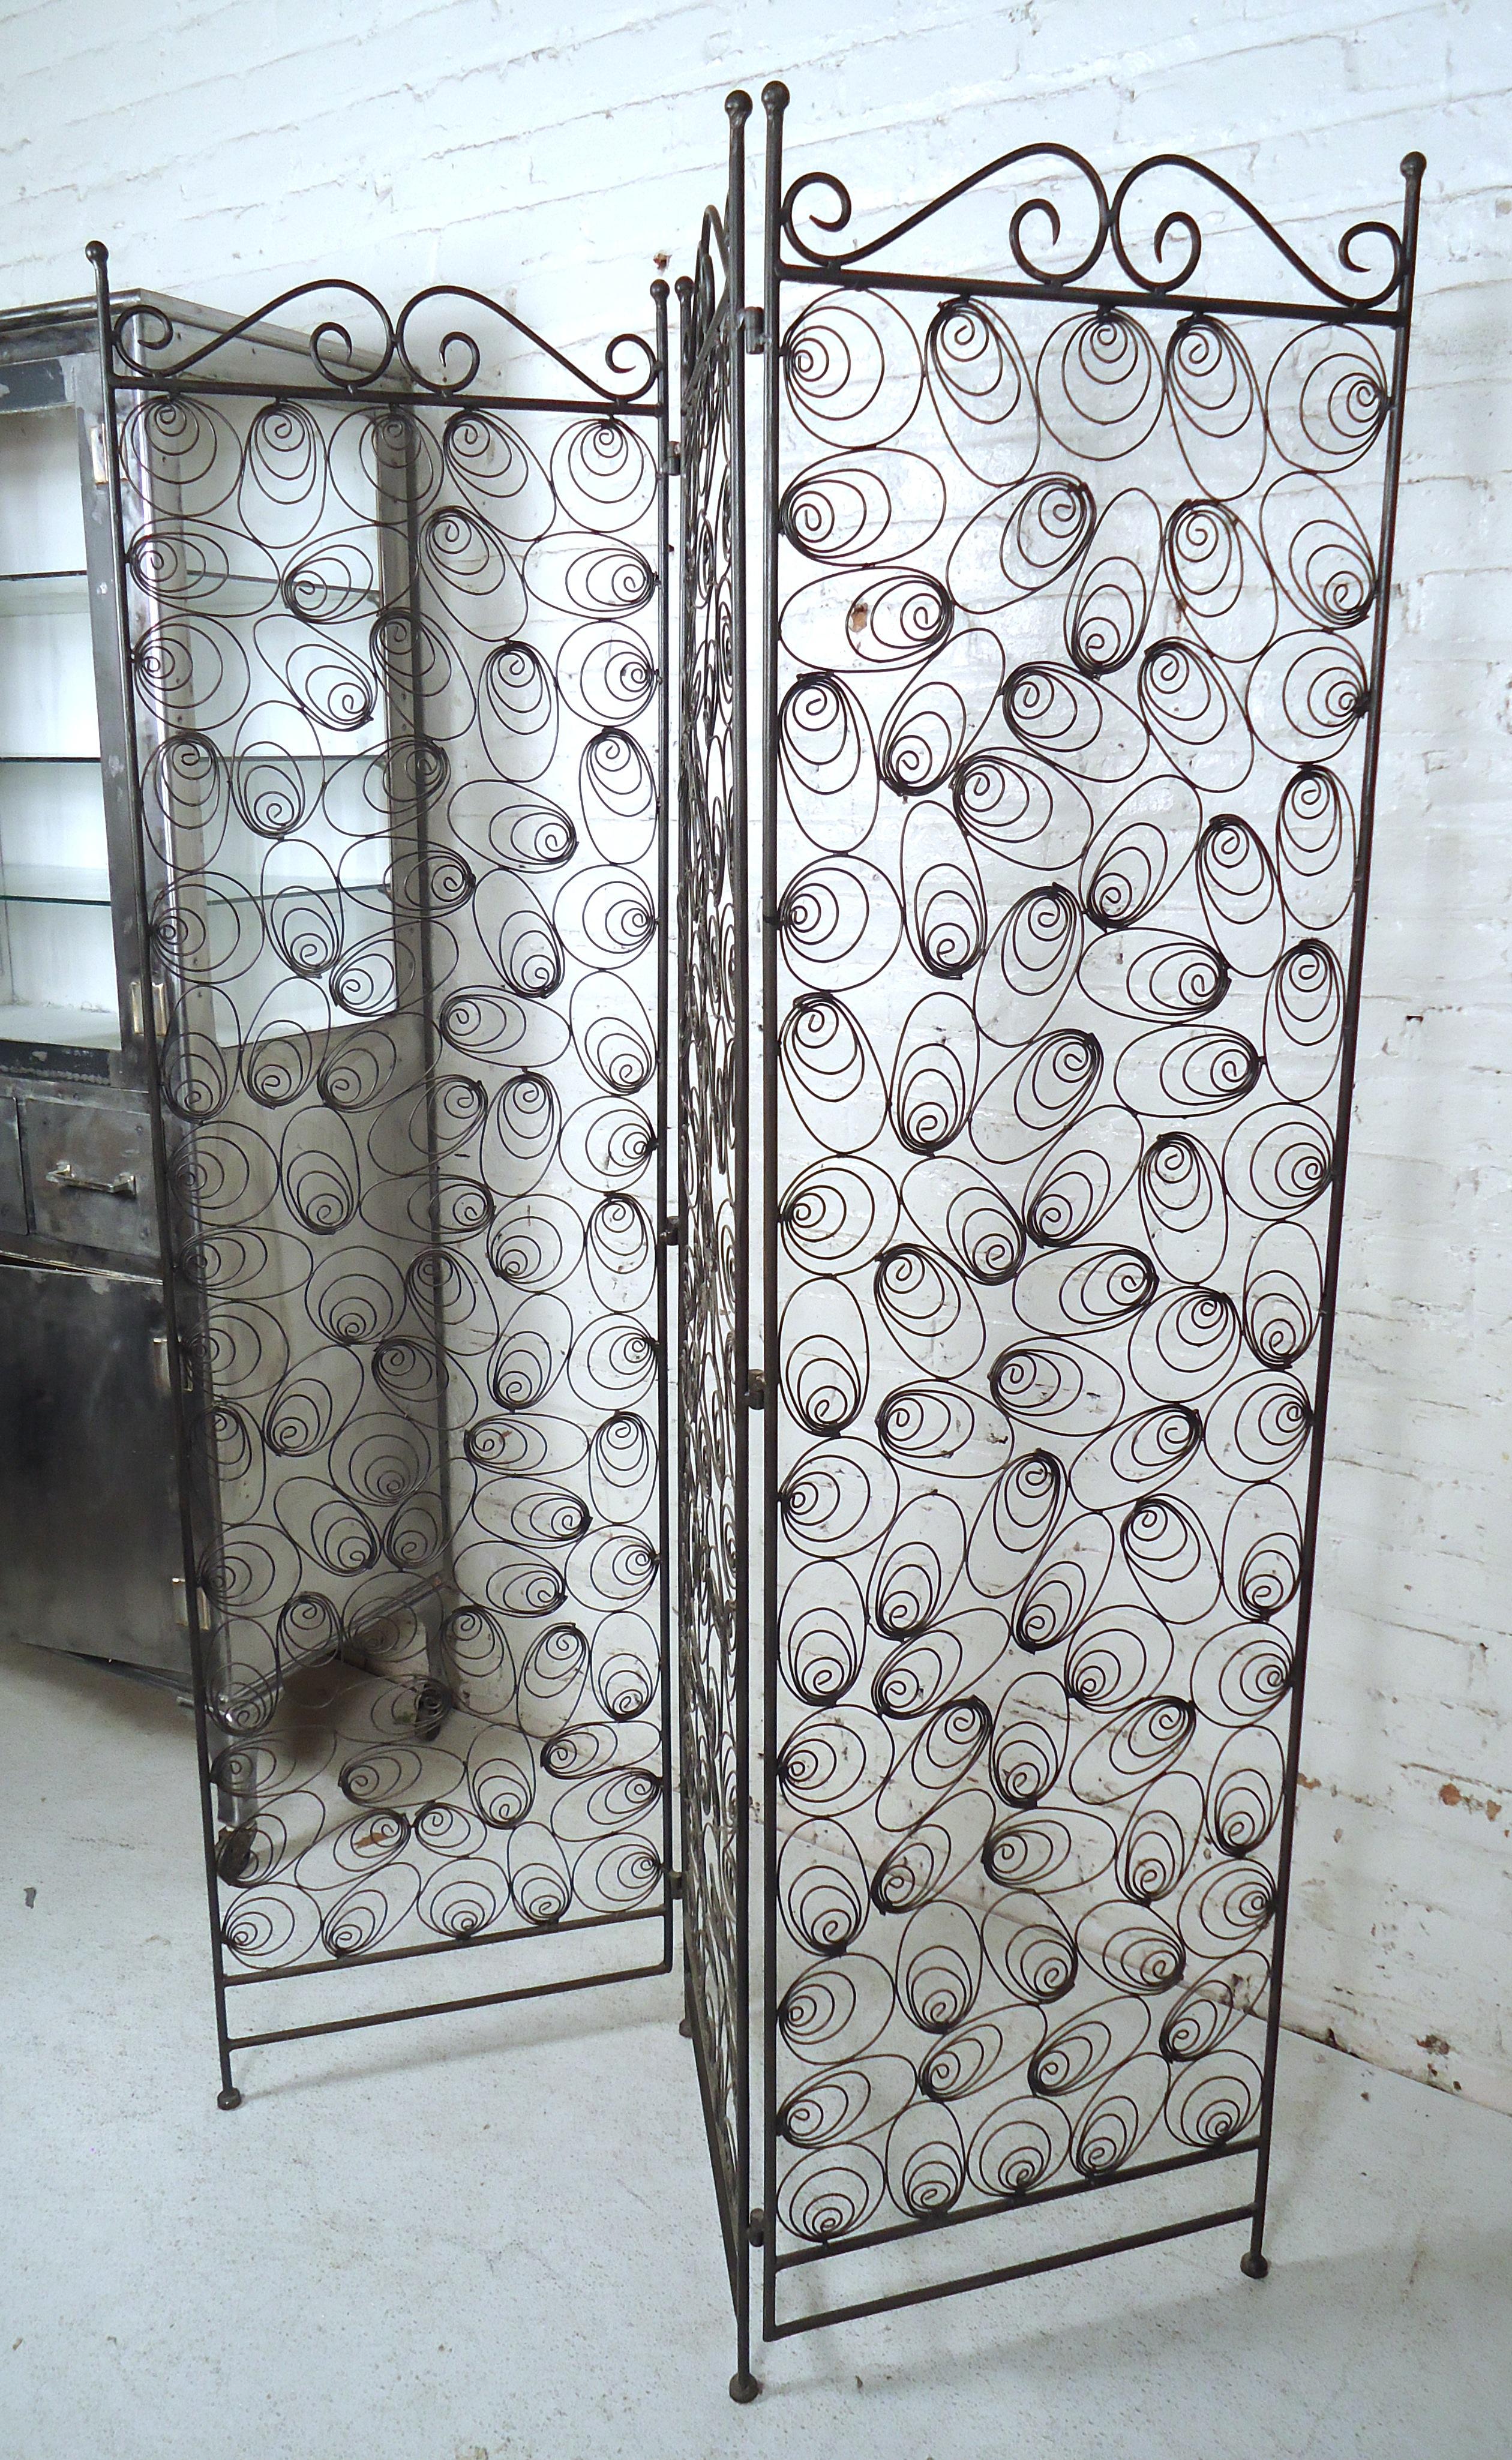 This gorgeous vintage modern screen features a unique metal designed frame. Makes a great addition to any home of office.

(Please confirm item location - NY or NJ - with dealer).